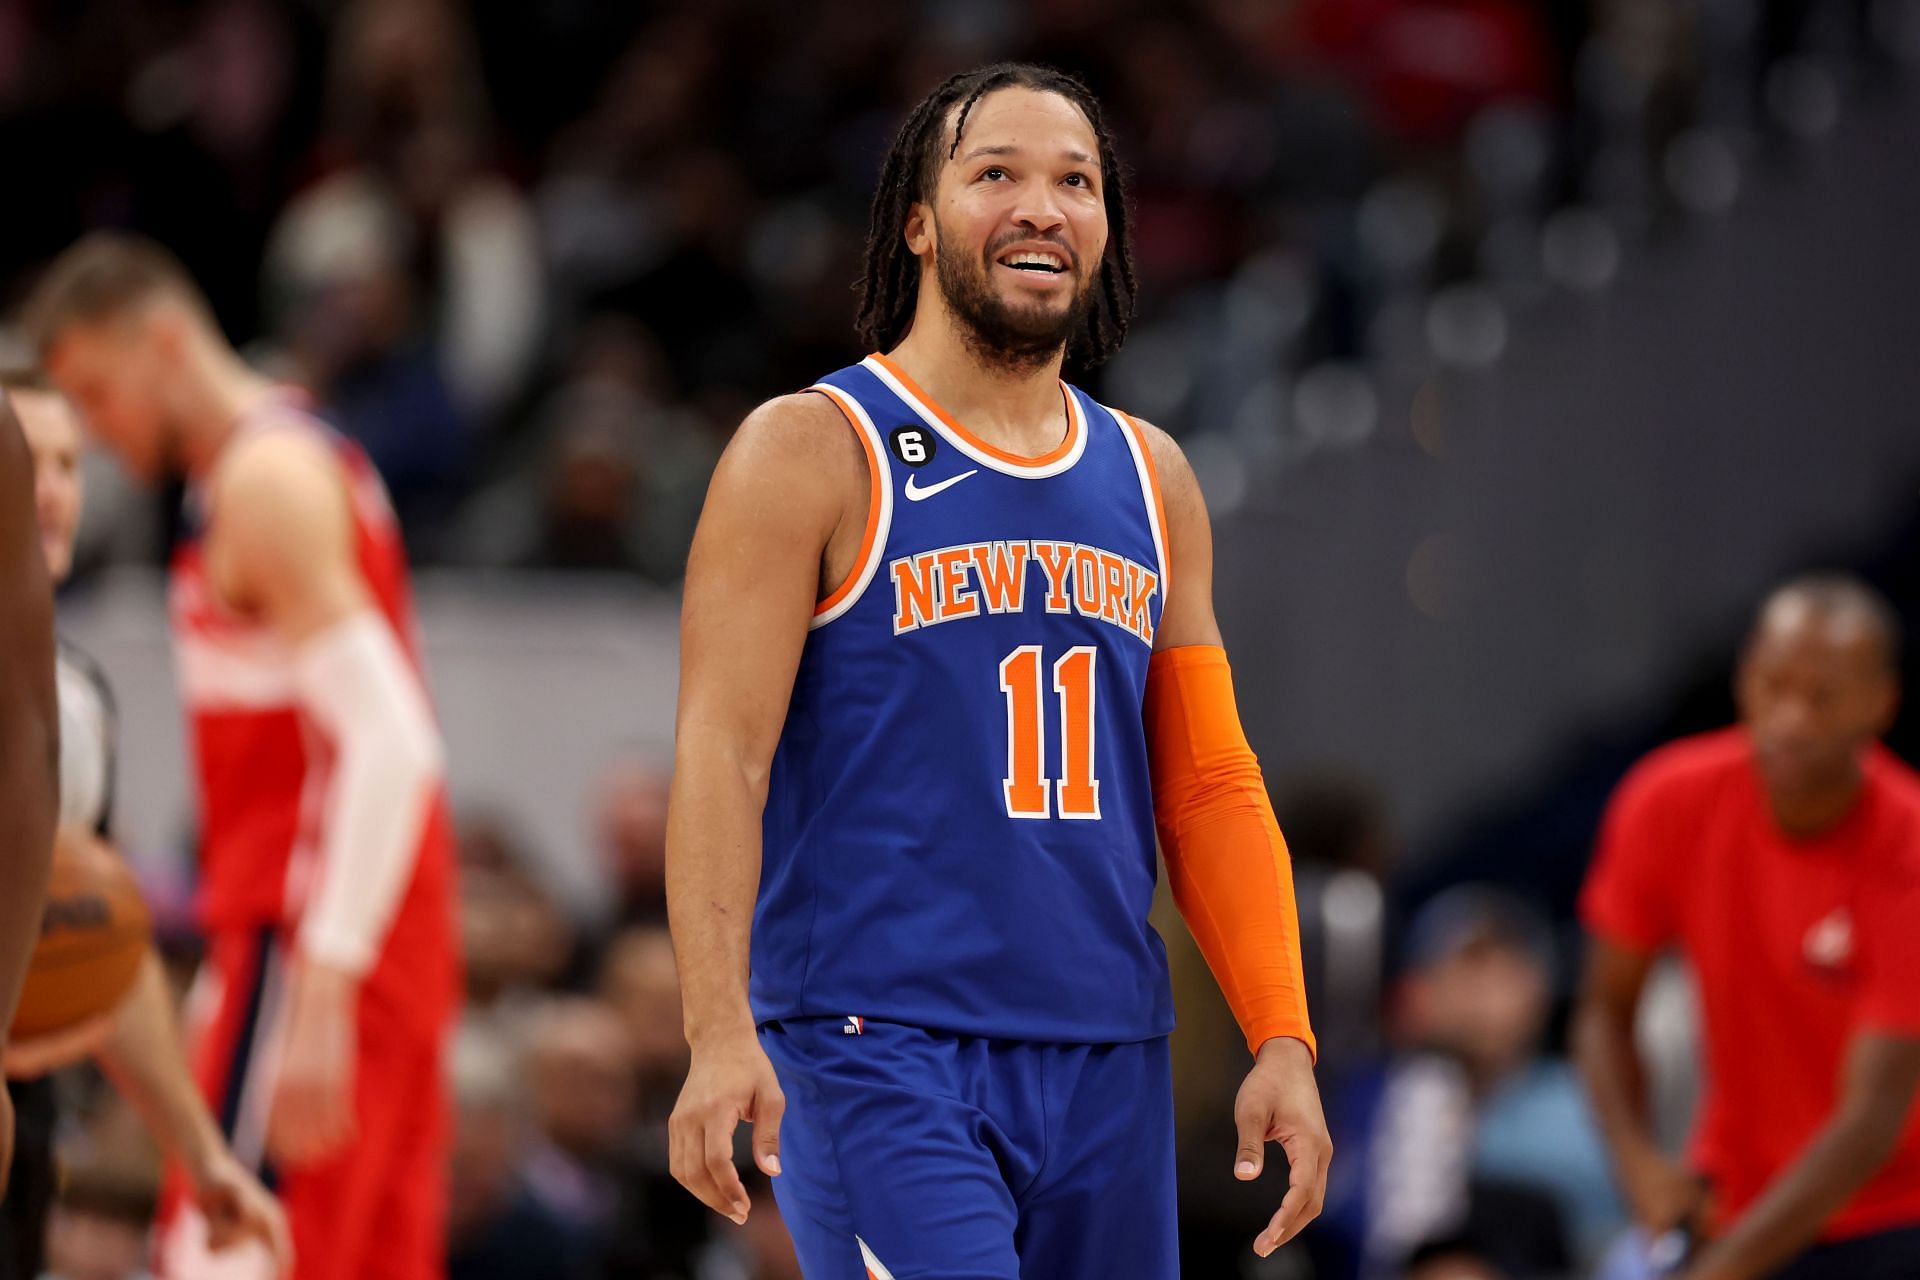 Looking at Jalen Brunson's All-Star prospects in his breakout season